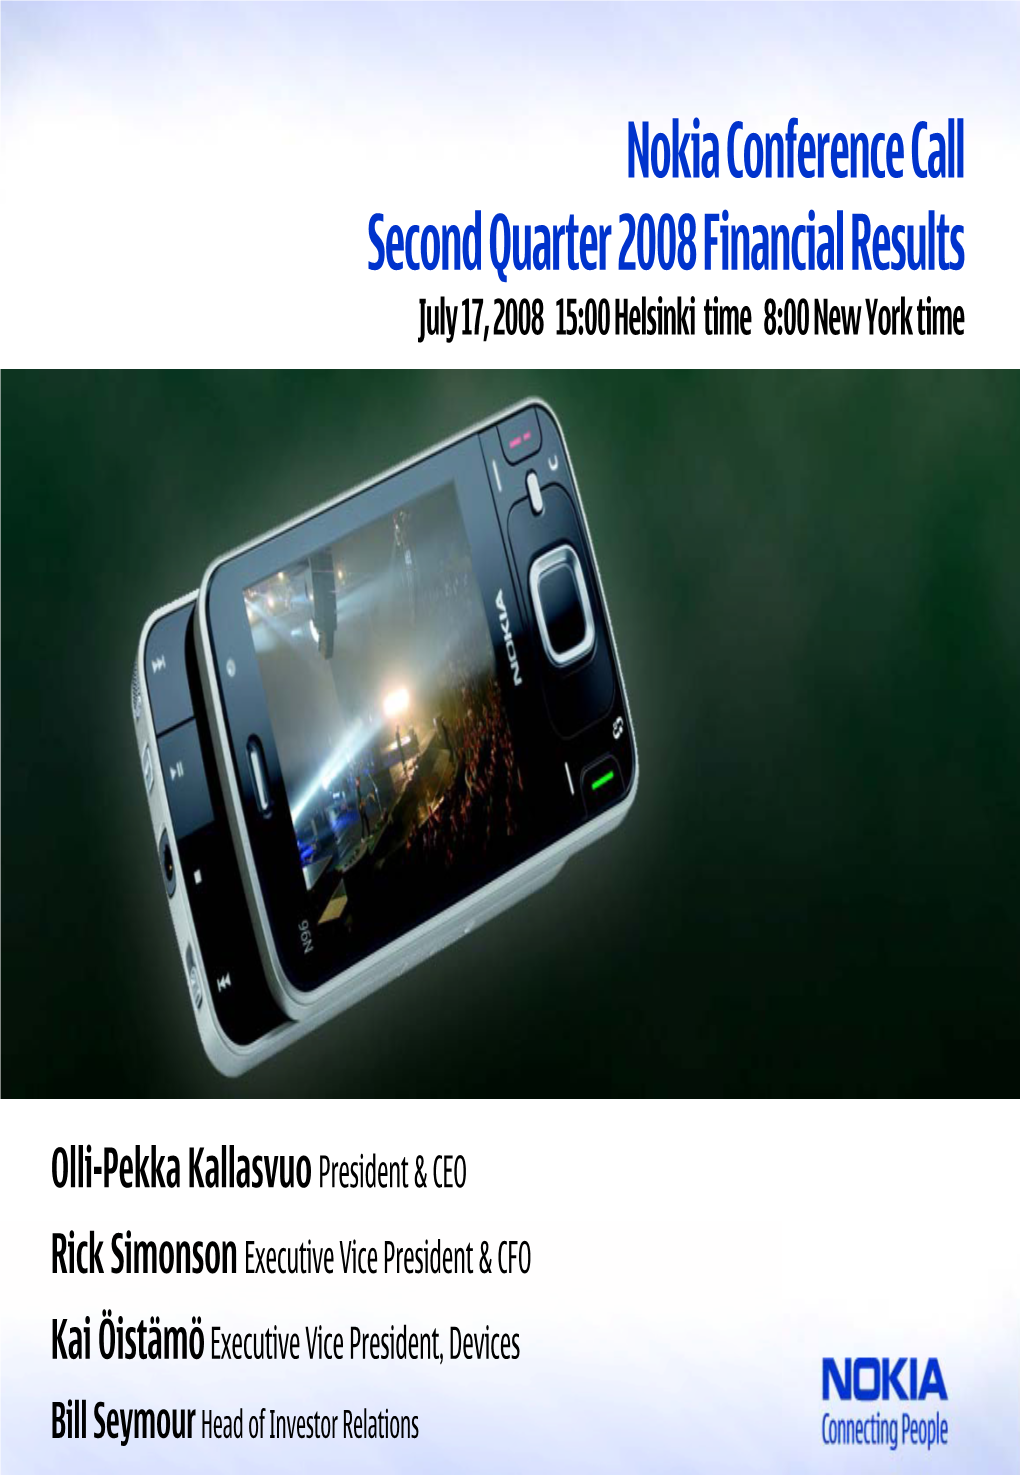 Nokia Conference Call Second Quarter 2006 Financian Results